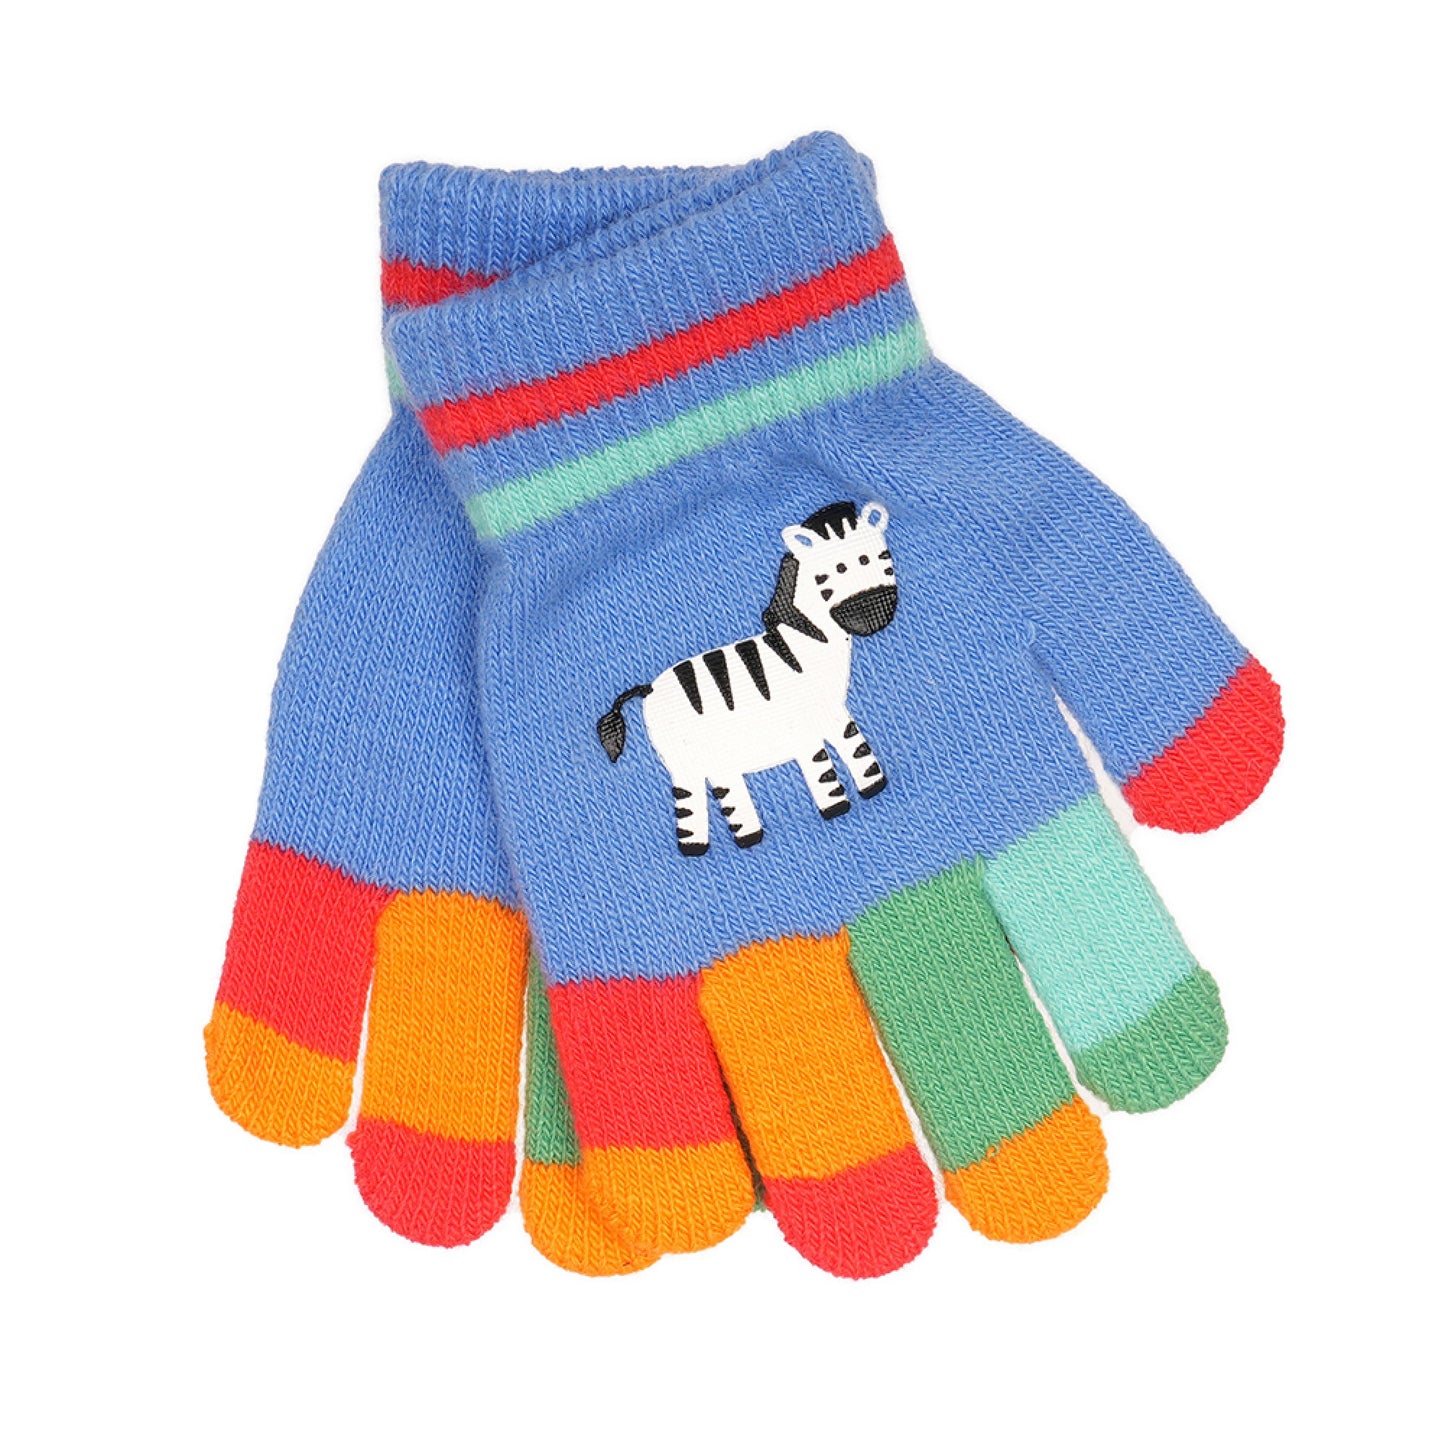 3 Pairs Children's Colourful Striped Thermal Magic Stretch Gloves with Animal Motifs - Elephant, Giraffe, Zebra